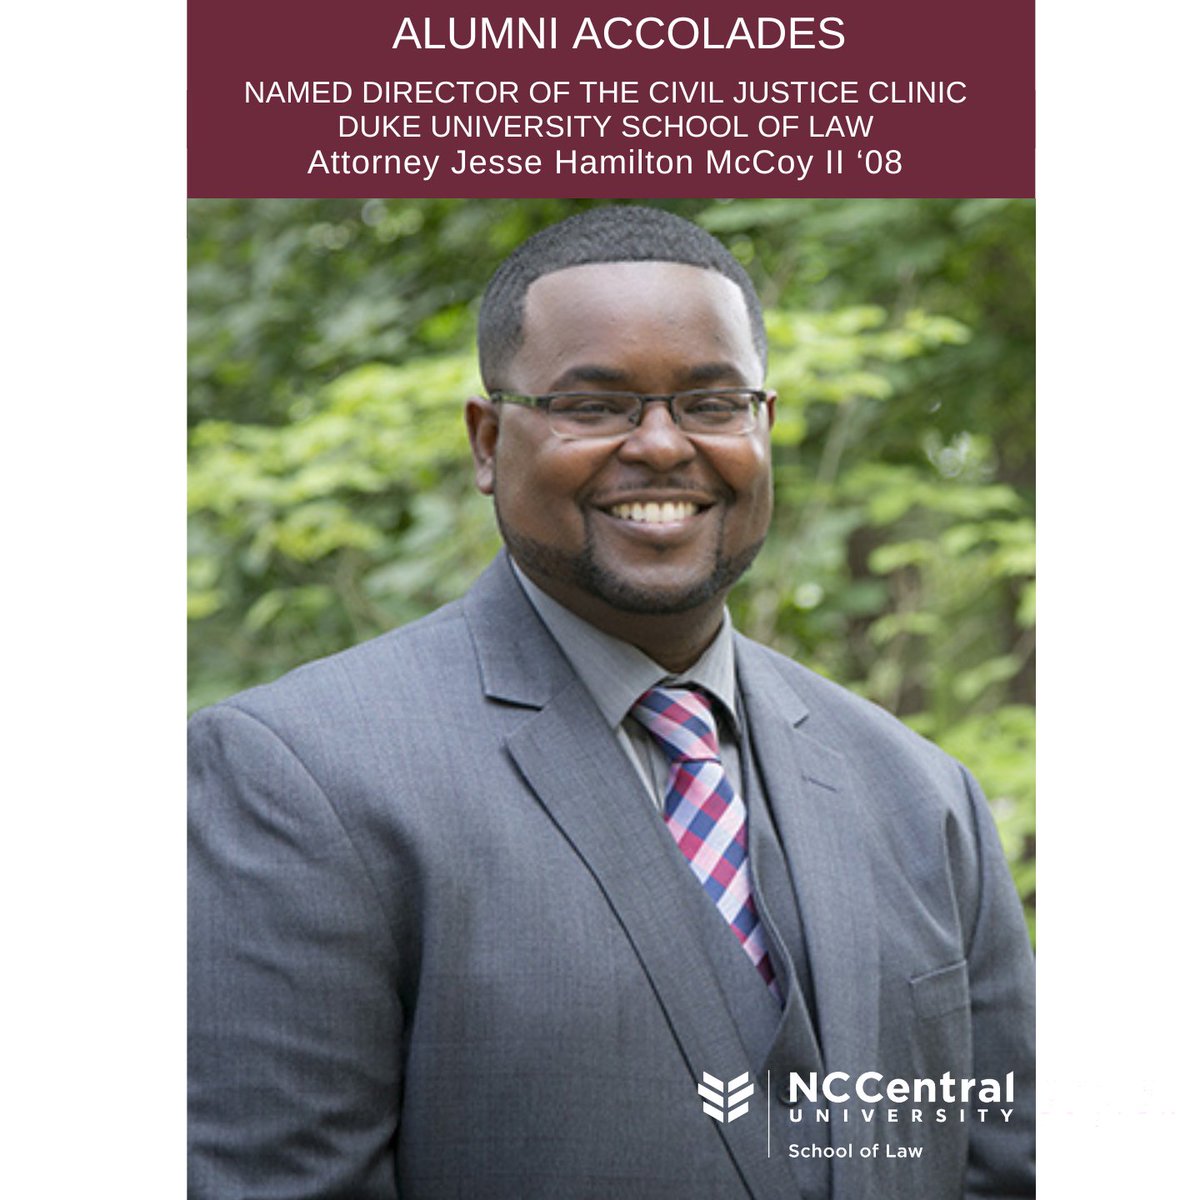 Congrats #NCCULaw alumnus and Clinical Professor of Law at #DukeLaw, Jesse Hamilton McCoy II ‘08. McCoy was named director of the Civil Justice Clinic at #DukeLaw. Former attorney for Legal Aid, McCoy served as supervising attorney since joining in 2017. bit.ly/4aLFsCB